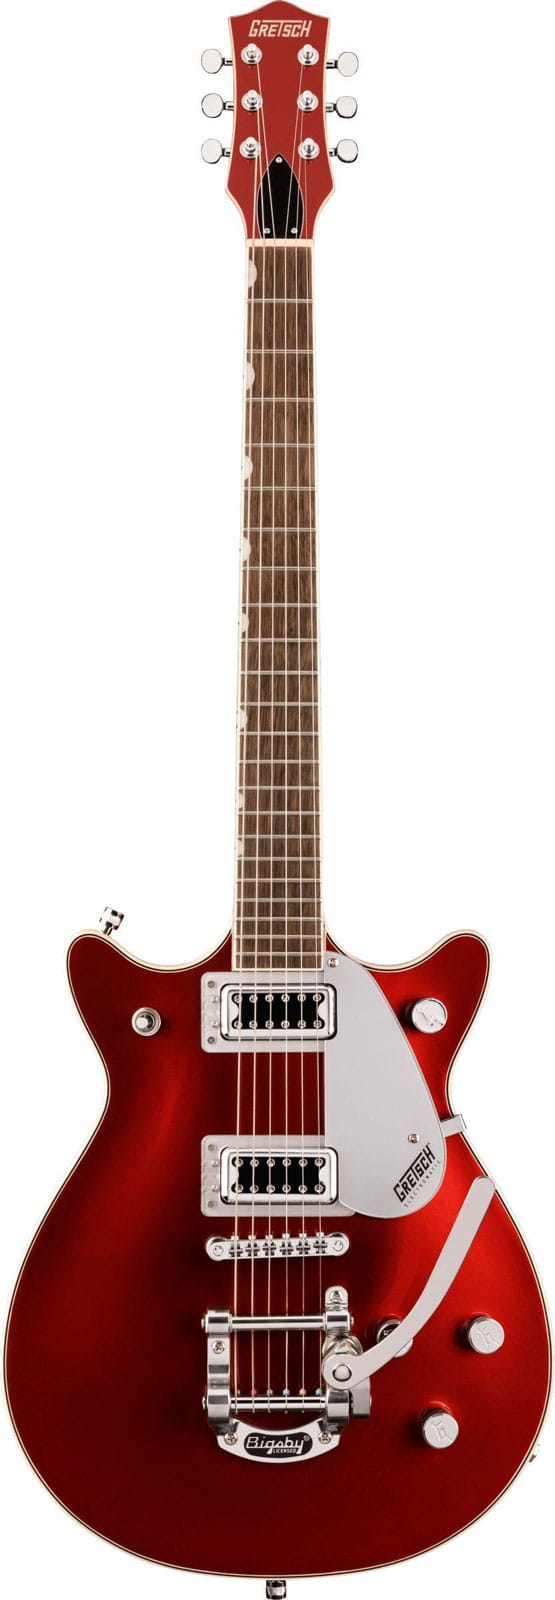 GRETSCH GUITARS G5232T ELECTROMATIC DOUBLE JET FT WITH BIGSBY IL FIRESTICK RED